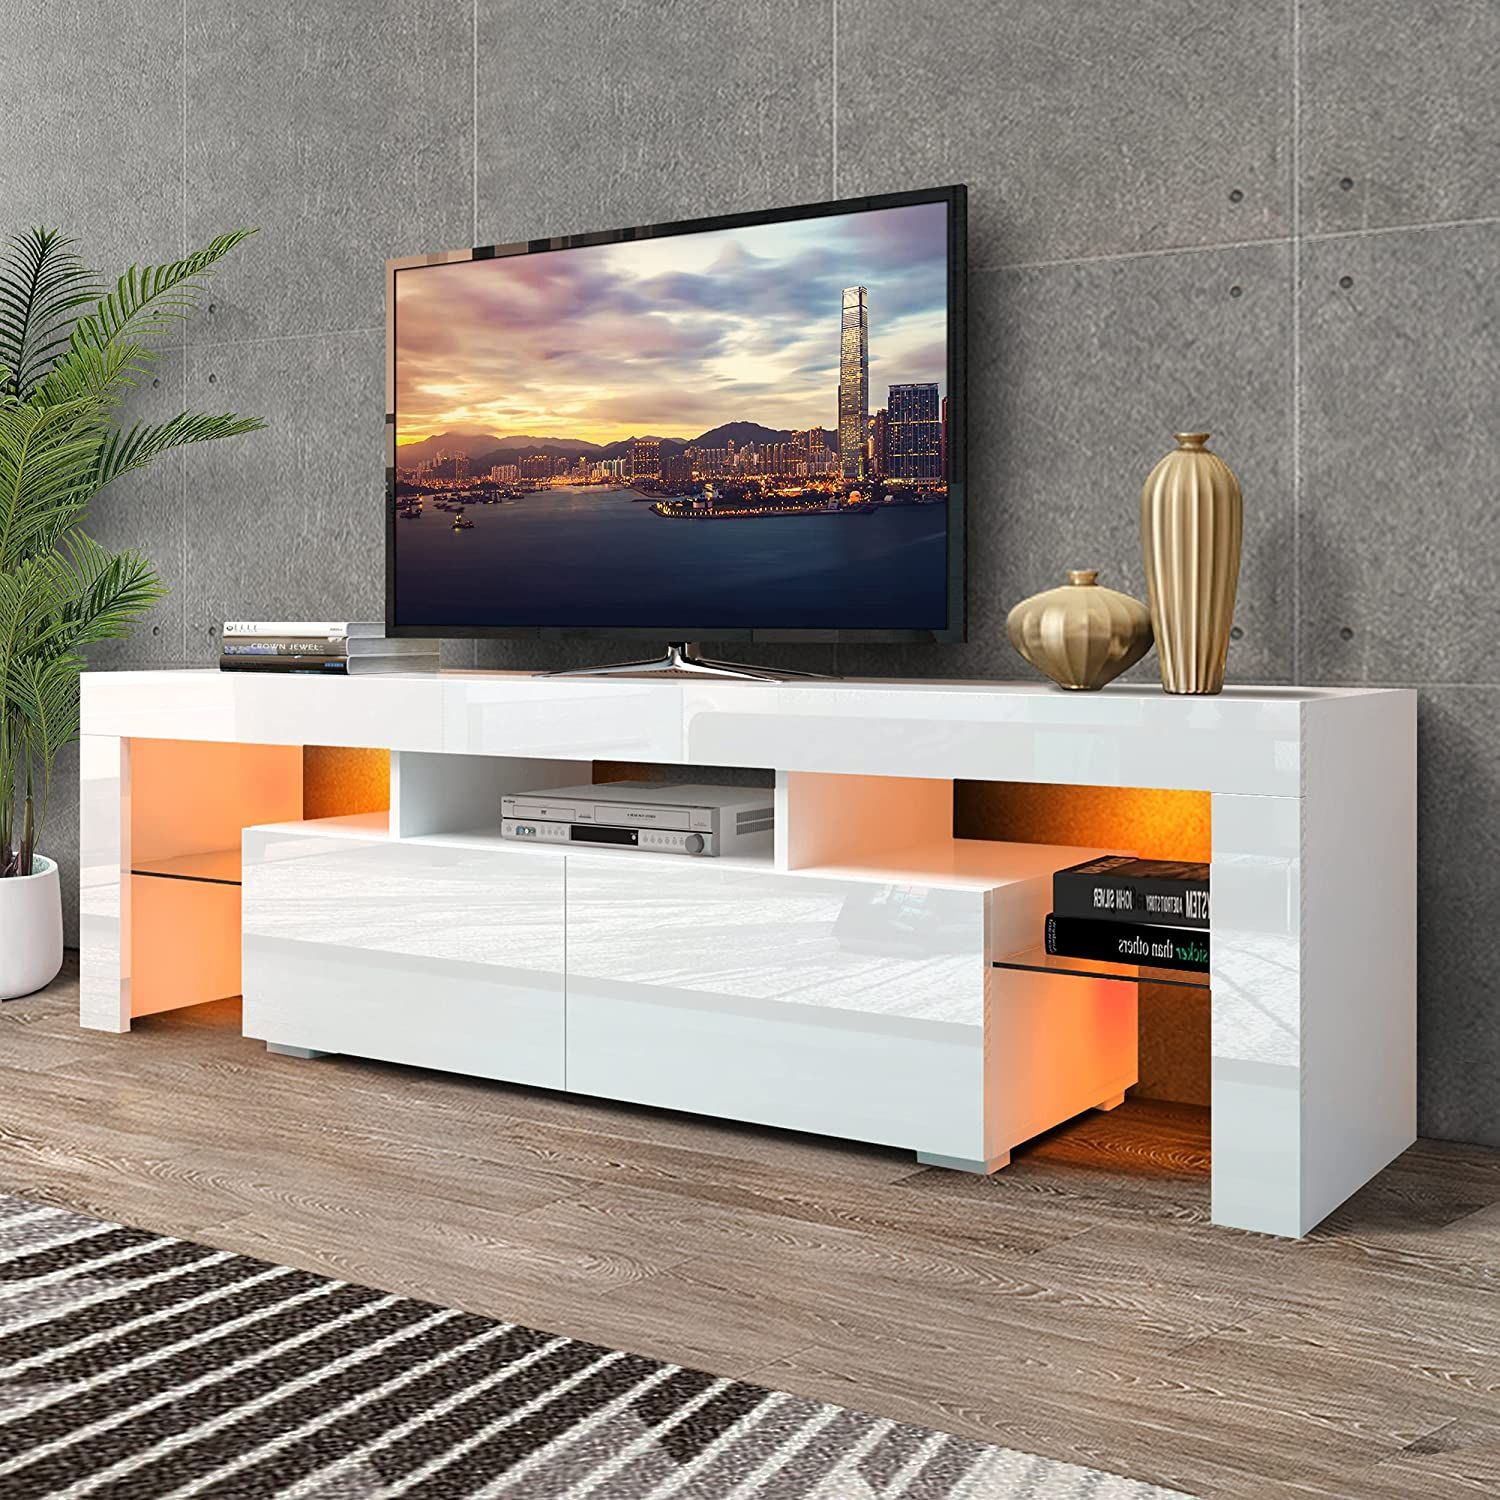 Dmaith Tv Stand | Ts003 Tv Stand With Led Lights | 2 Drawers And Open Within Tv Stands With Led Lights & Power Outlet (View 7 of 20)